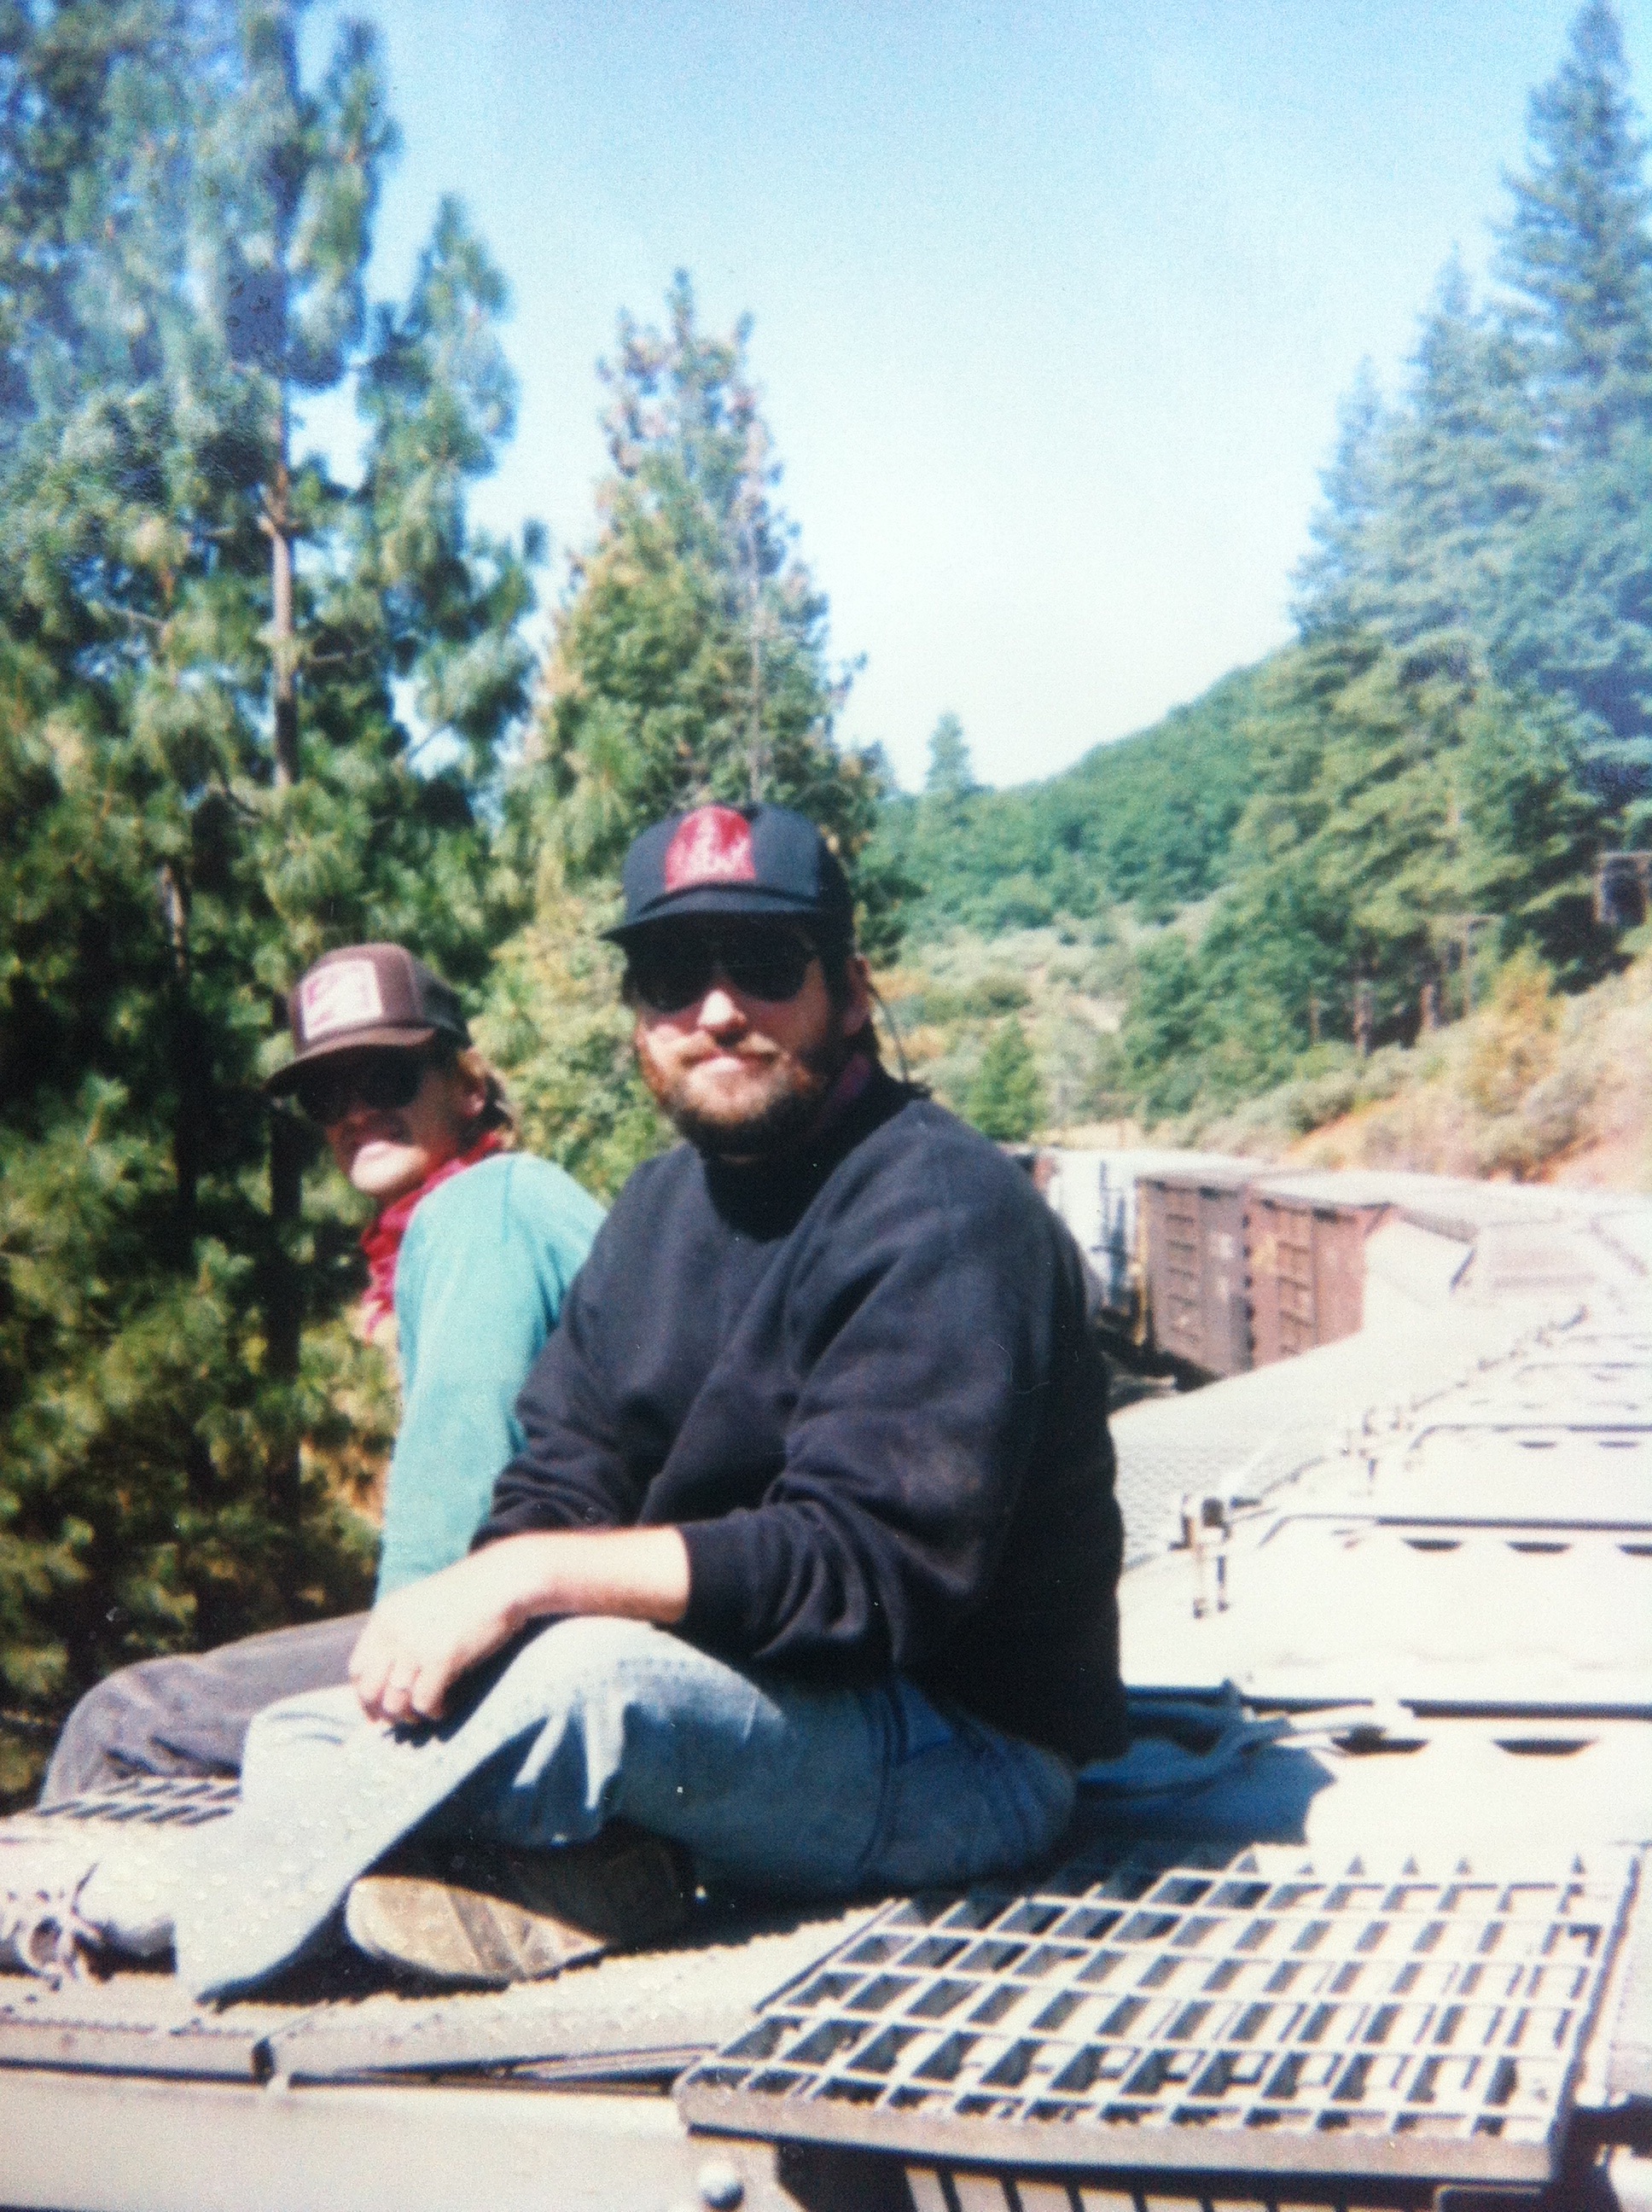 Riding a freight train over the Sierra's with Producer Robert Levy.